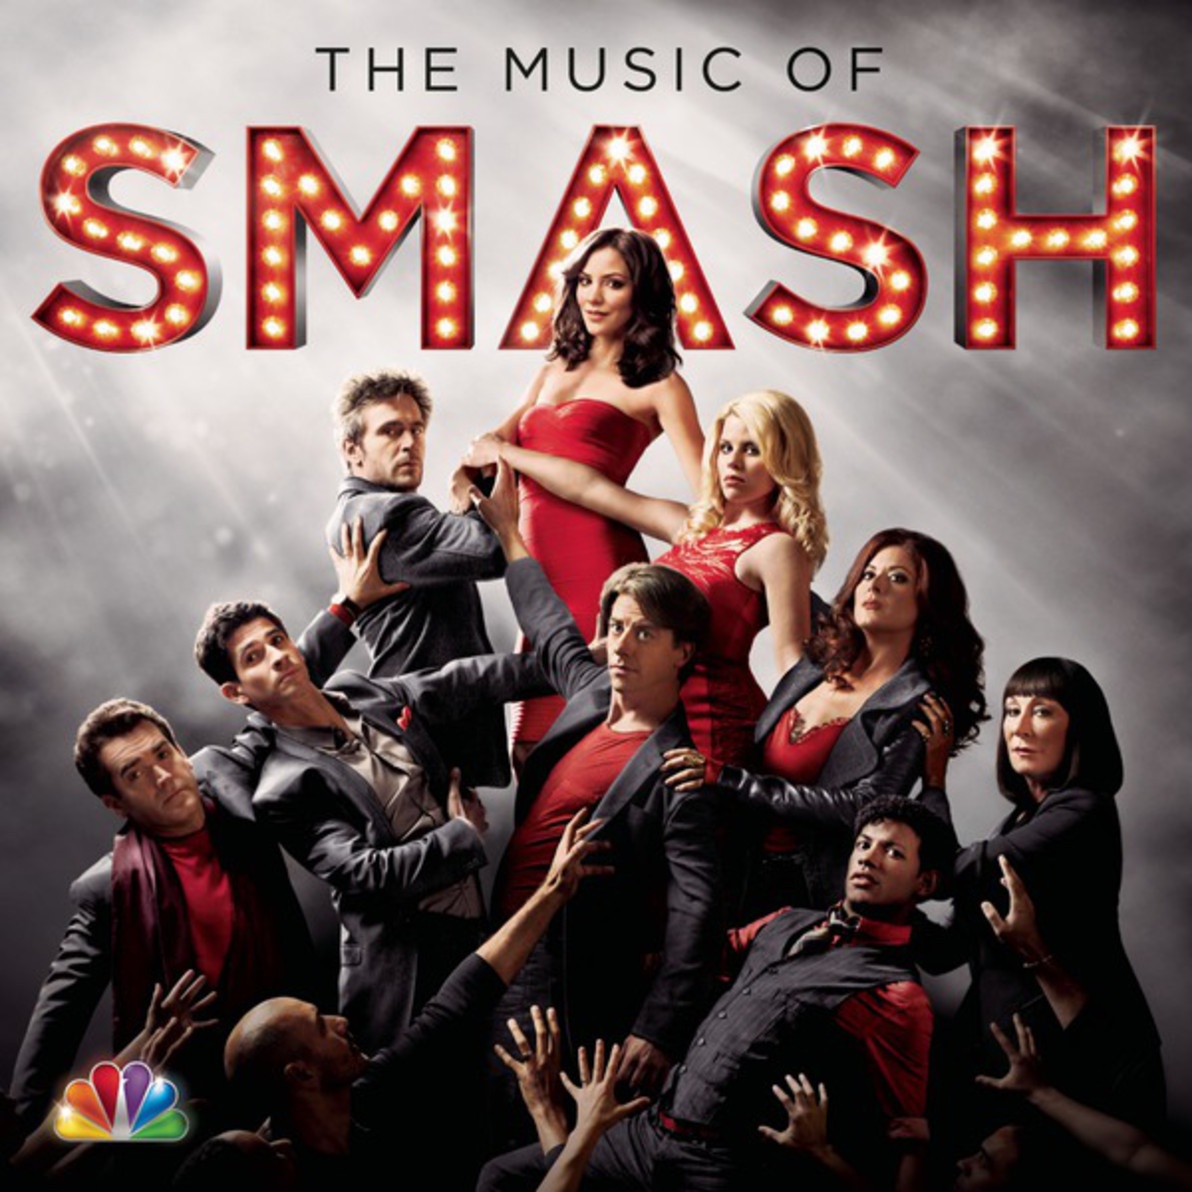 Let Me Be Your Star (SMASH Cast Version featuring Katharine McPhee and Megan Hilty)